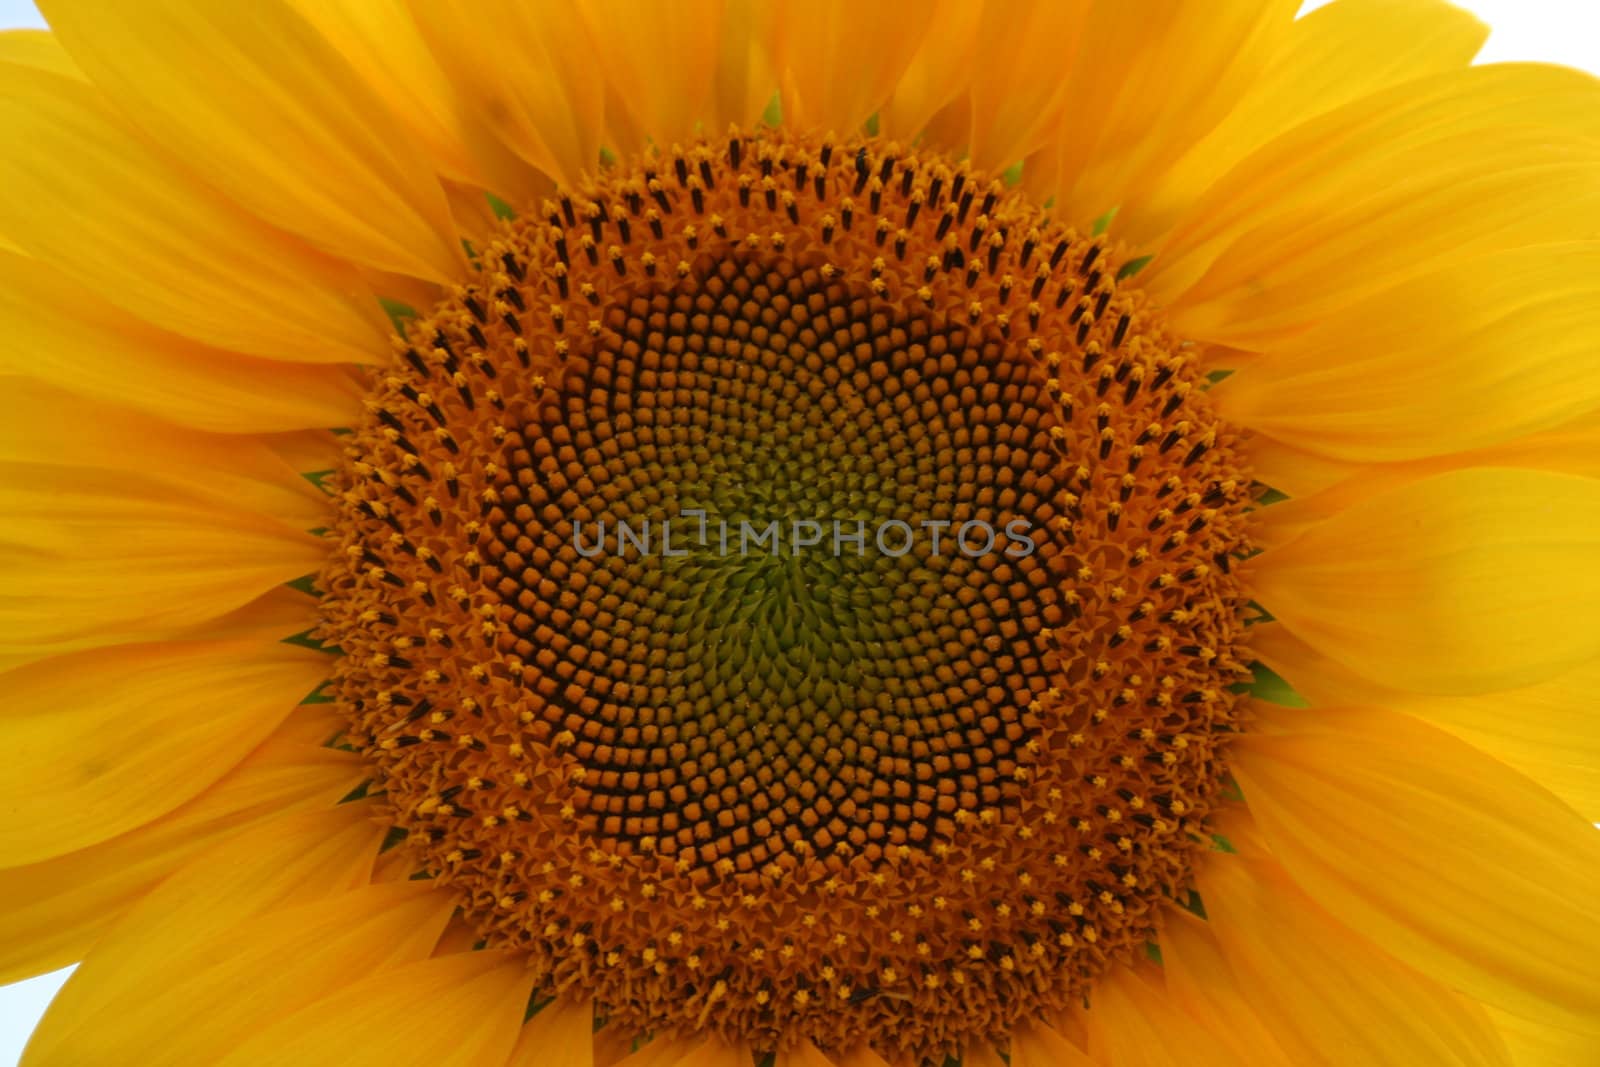 Nice sunflower - detail of the centre of the flower